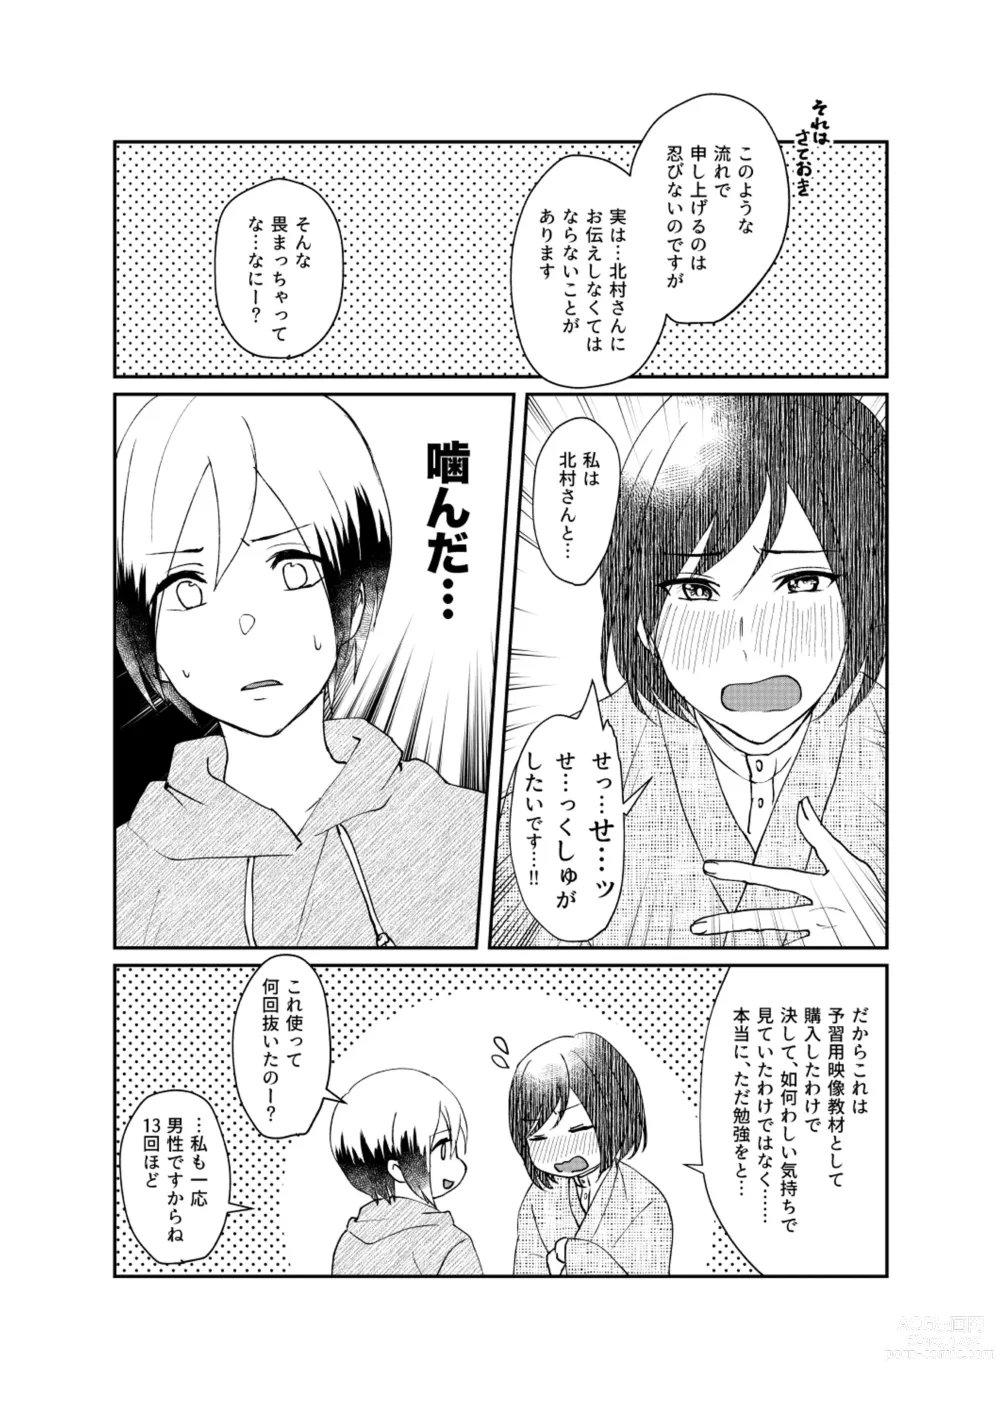 Page 5 of doujinshi 他人のそら似